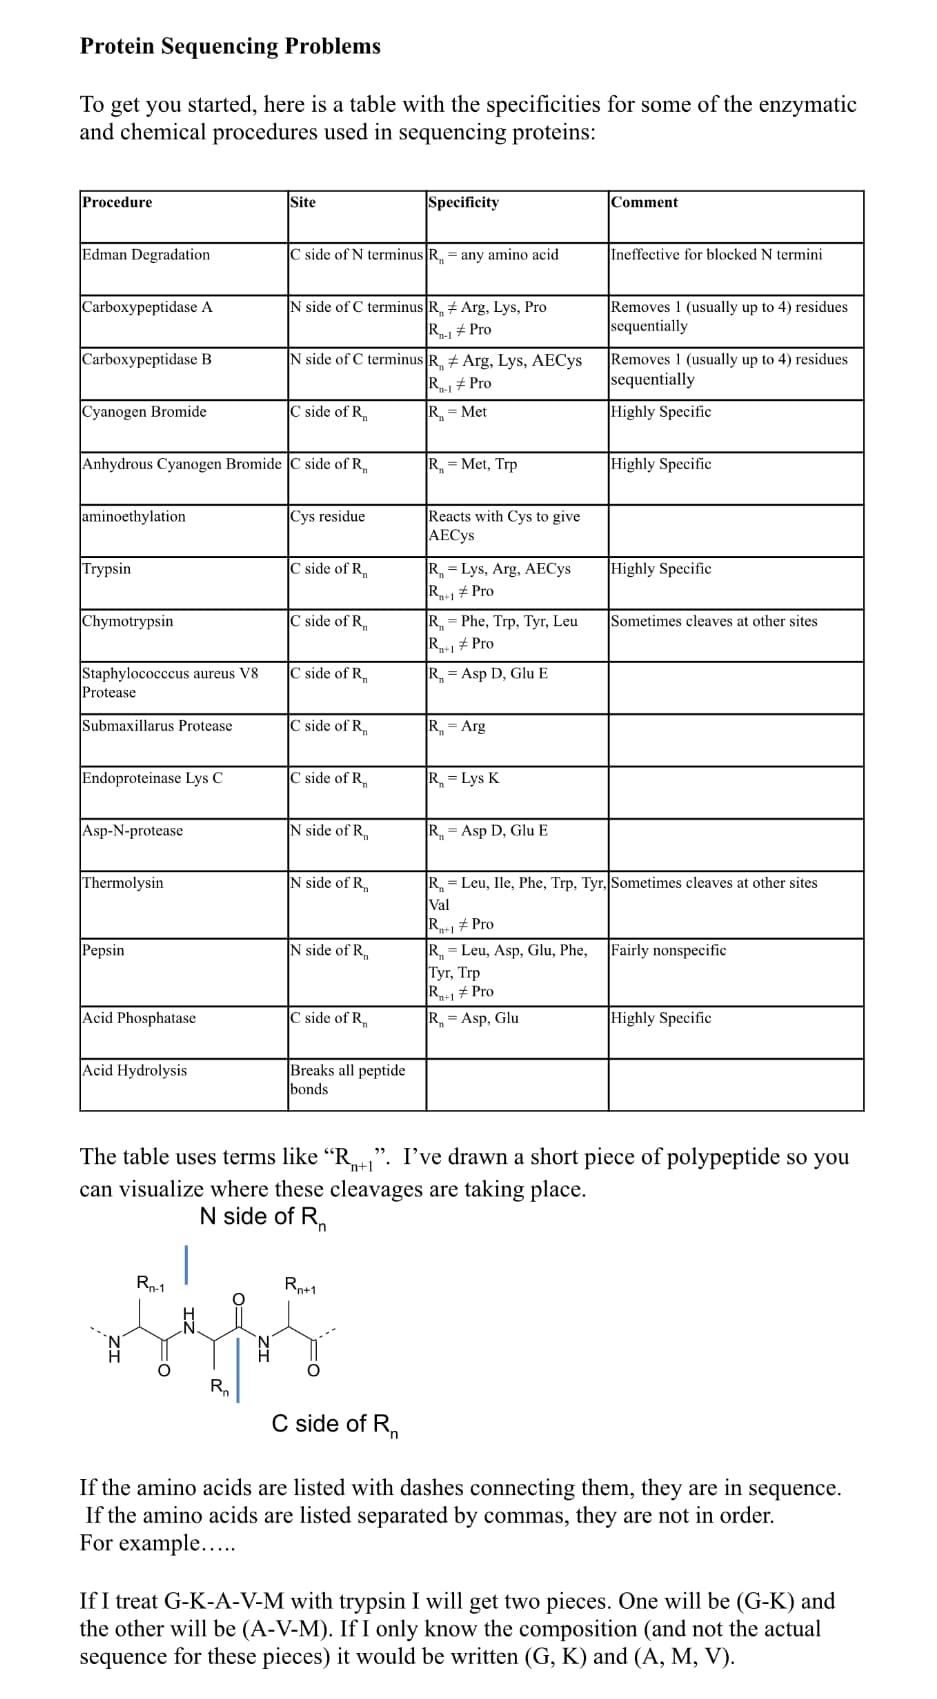 Protein Sequencing Problems
To get you started, here is a table with the specificities for some of the enzymatic
and chemical procedures used in sequencing proteins:
Procedure
Edman Degradation
Carboxypeptidase A
Carboxypeptidase B
Cyanogen Bromide
aminoethylation
Trypsin
Chymotrypsin
Staphylococccus aureus V8
Protease
Anhydrous Cyanogen Bromide C side of R
Submaxillarus Protease
Endoproteinase Lys C
Asp-N-protease
Thermolysin
Pepsin
Acid Phosphatase
Acid Hydrolysis
Site
R₁-1
R₂
C side of N terminus R = any amino acid
N side of C terminus R, # Arg, Lys, Pro
R₁-1 Pro
N side of C terminus R Arg, Lys, AECys
R₁-1 # Pro
R = Met
C side of R₁
Cys residue
C side of R
Cside of R
C side of R
C side of R₁
C side of R
N side of R
N side of R₁
N side of R
Specificity
C side of R₁
Breaks all peptide
bonds
Rn+1
R = Met, Trp
Reacts with Cys to give
AECys
R = Lys, Arg, AECys
R₂+1 #Pro
R = Phe, Trp, Tyr, Leu
R₁+1 #Pro
R = Asp D, Glu E
R = Arg
R = Lys K
R = Asp D, Glu E
Comment
R=Leu, Asp, Glu, Phe,
Tyr, Trp
R₁+1 # Pro
R = Asp, Glu
Ineffective for blocked N termini
Removes 1 (usually up to 4) residues
sequentially
Removes 1 (usually up to 4) residues
sequentially
Highly Specific
Highly Specific
Highly Specific
Sometimes cleaves at other sites
R = Leu, Ile, Phe, Trp, Tyr, Sometimes cleaves at other sites
Val
R₁+1 #Pro
The table uses terms like "R". I've drawn a short piece of polypeptide so you
can visualize where these cleavages are taking place.
N side of R₁
Fairly nonspecific
Highly Specific
C side of R₁
If the amino acids are listed with dashes connecting them, they are in sequence.
If the amino acids are listed separated by commas, they are not in order.
For example.....
If I treat G-K-A-V-M with trypsin I will get two pieces. One will be (G-K) and
the other will be (A-V-M). If I only know the composition (and not the actual
sequence for these pieces) it would be written (G, K) and (A, M, V).